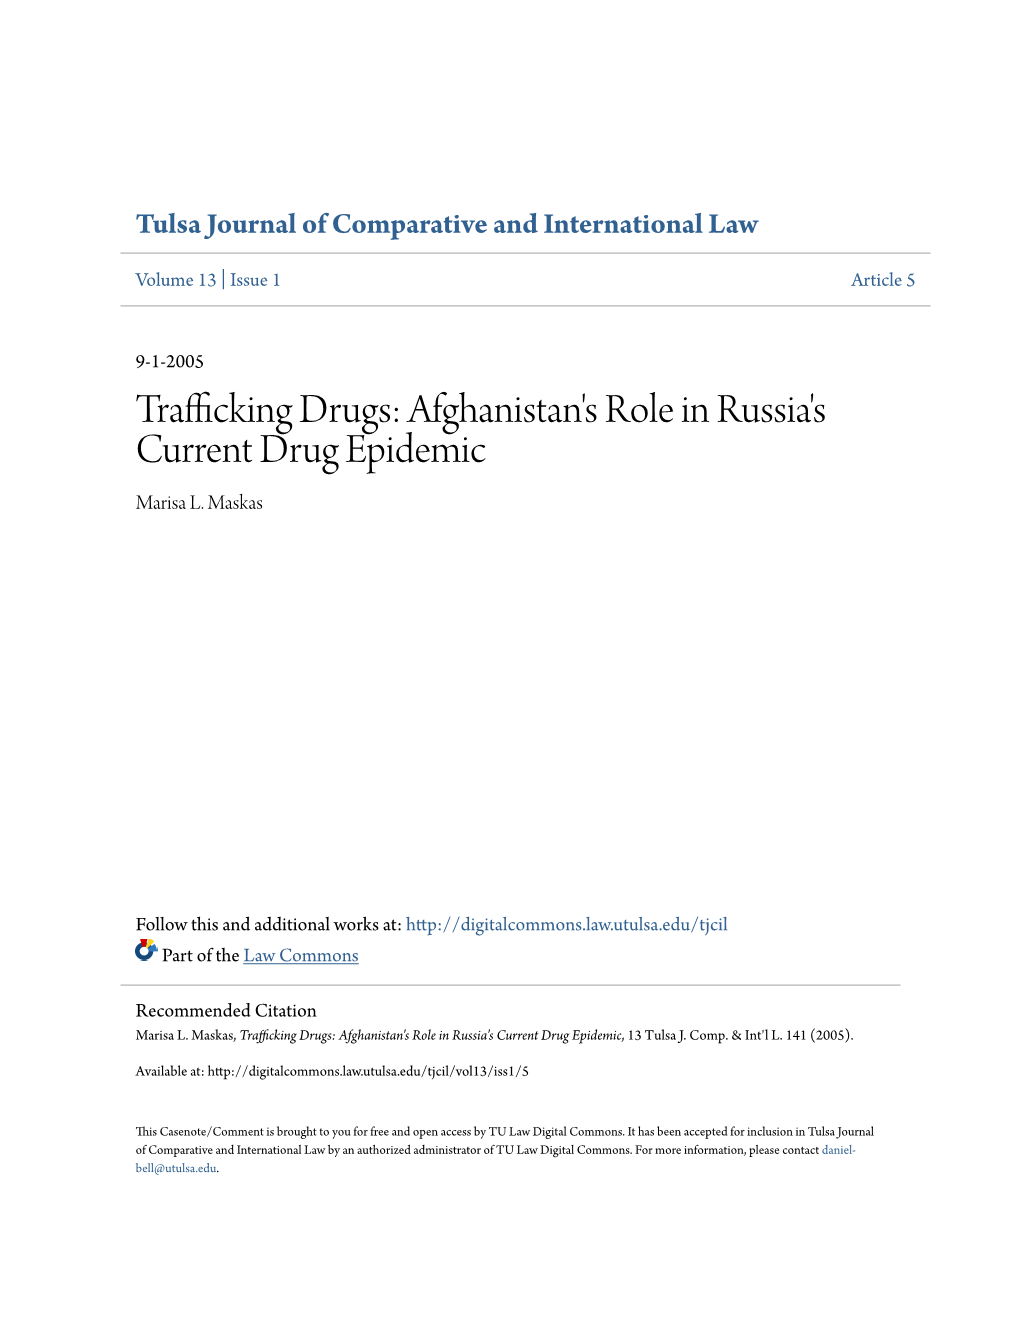 Trafficking Drugs: Afghanistan's Role in Russia's Current Drug Epidemic Marisa L